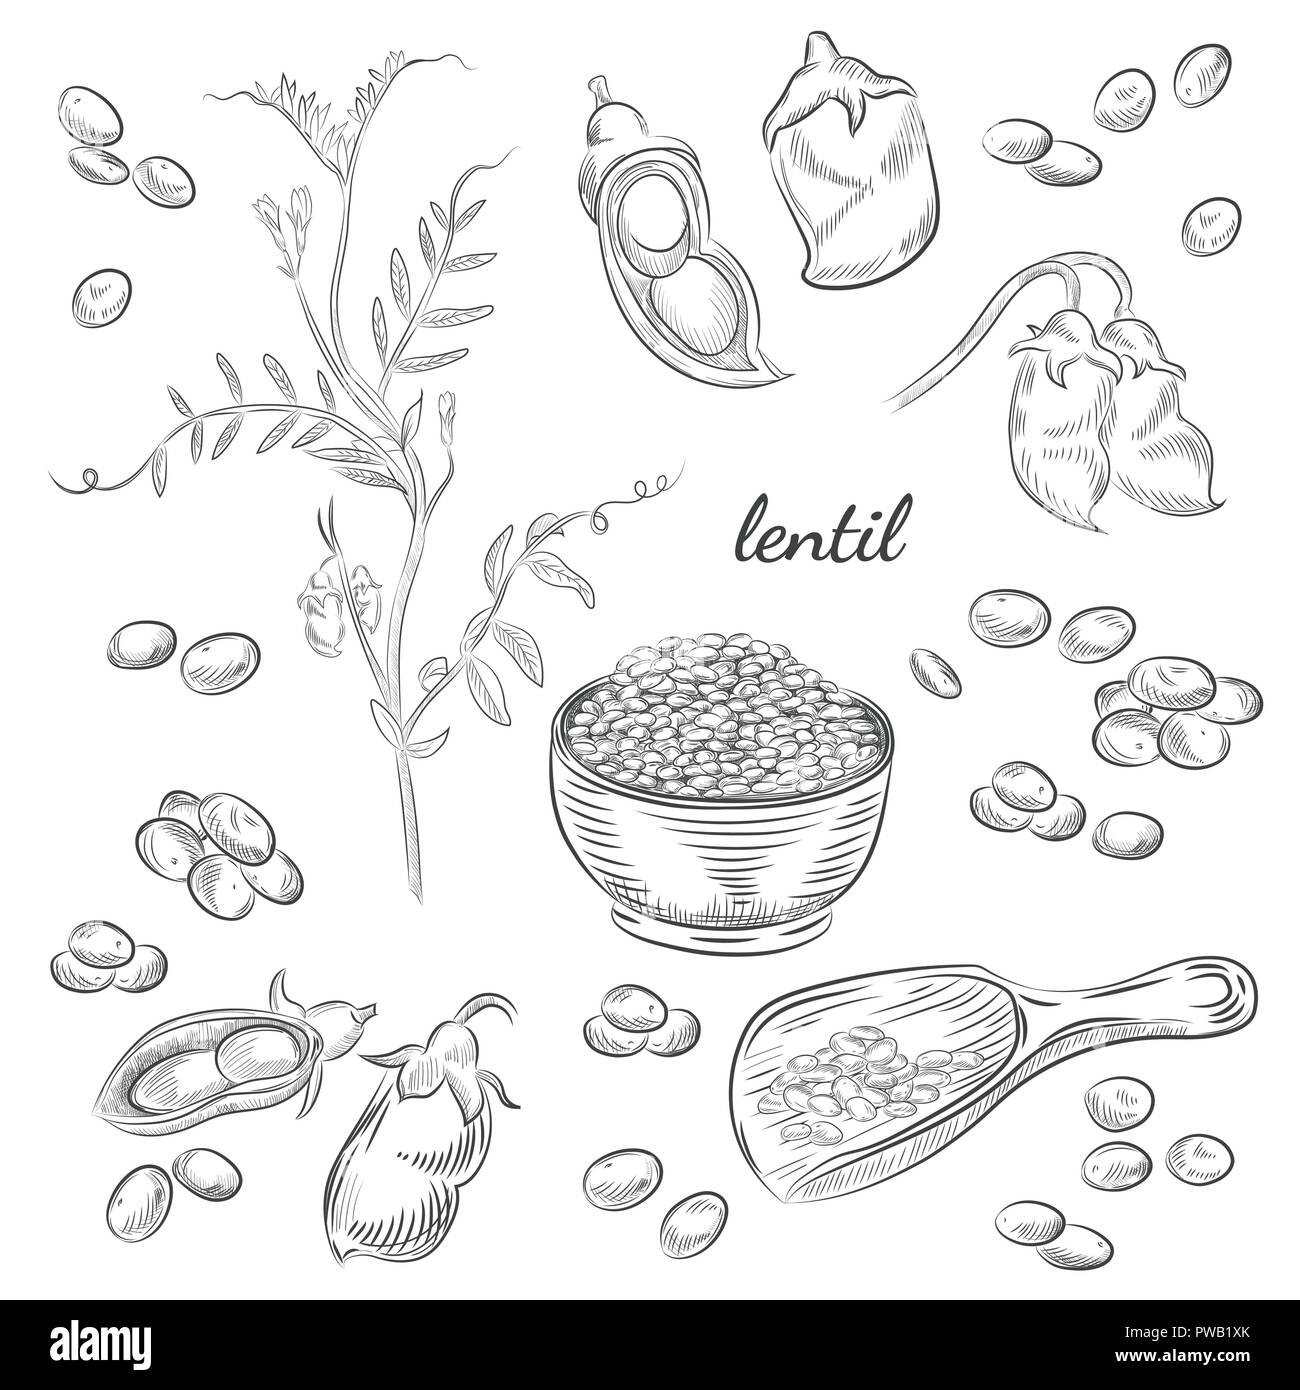 Lentil plant hand drawn illustration. Peas and pods sketches. Scoop for lentils isolated on white background. Stock Vector